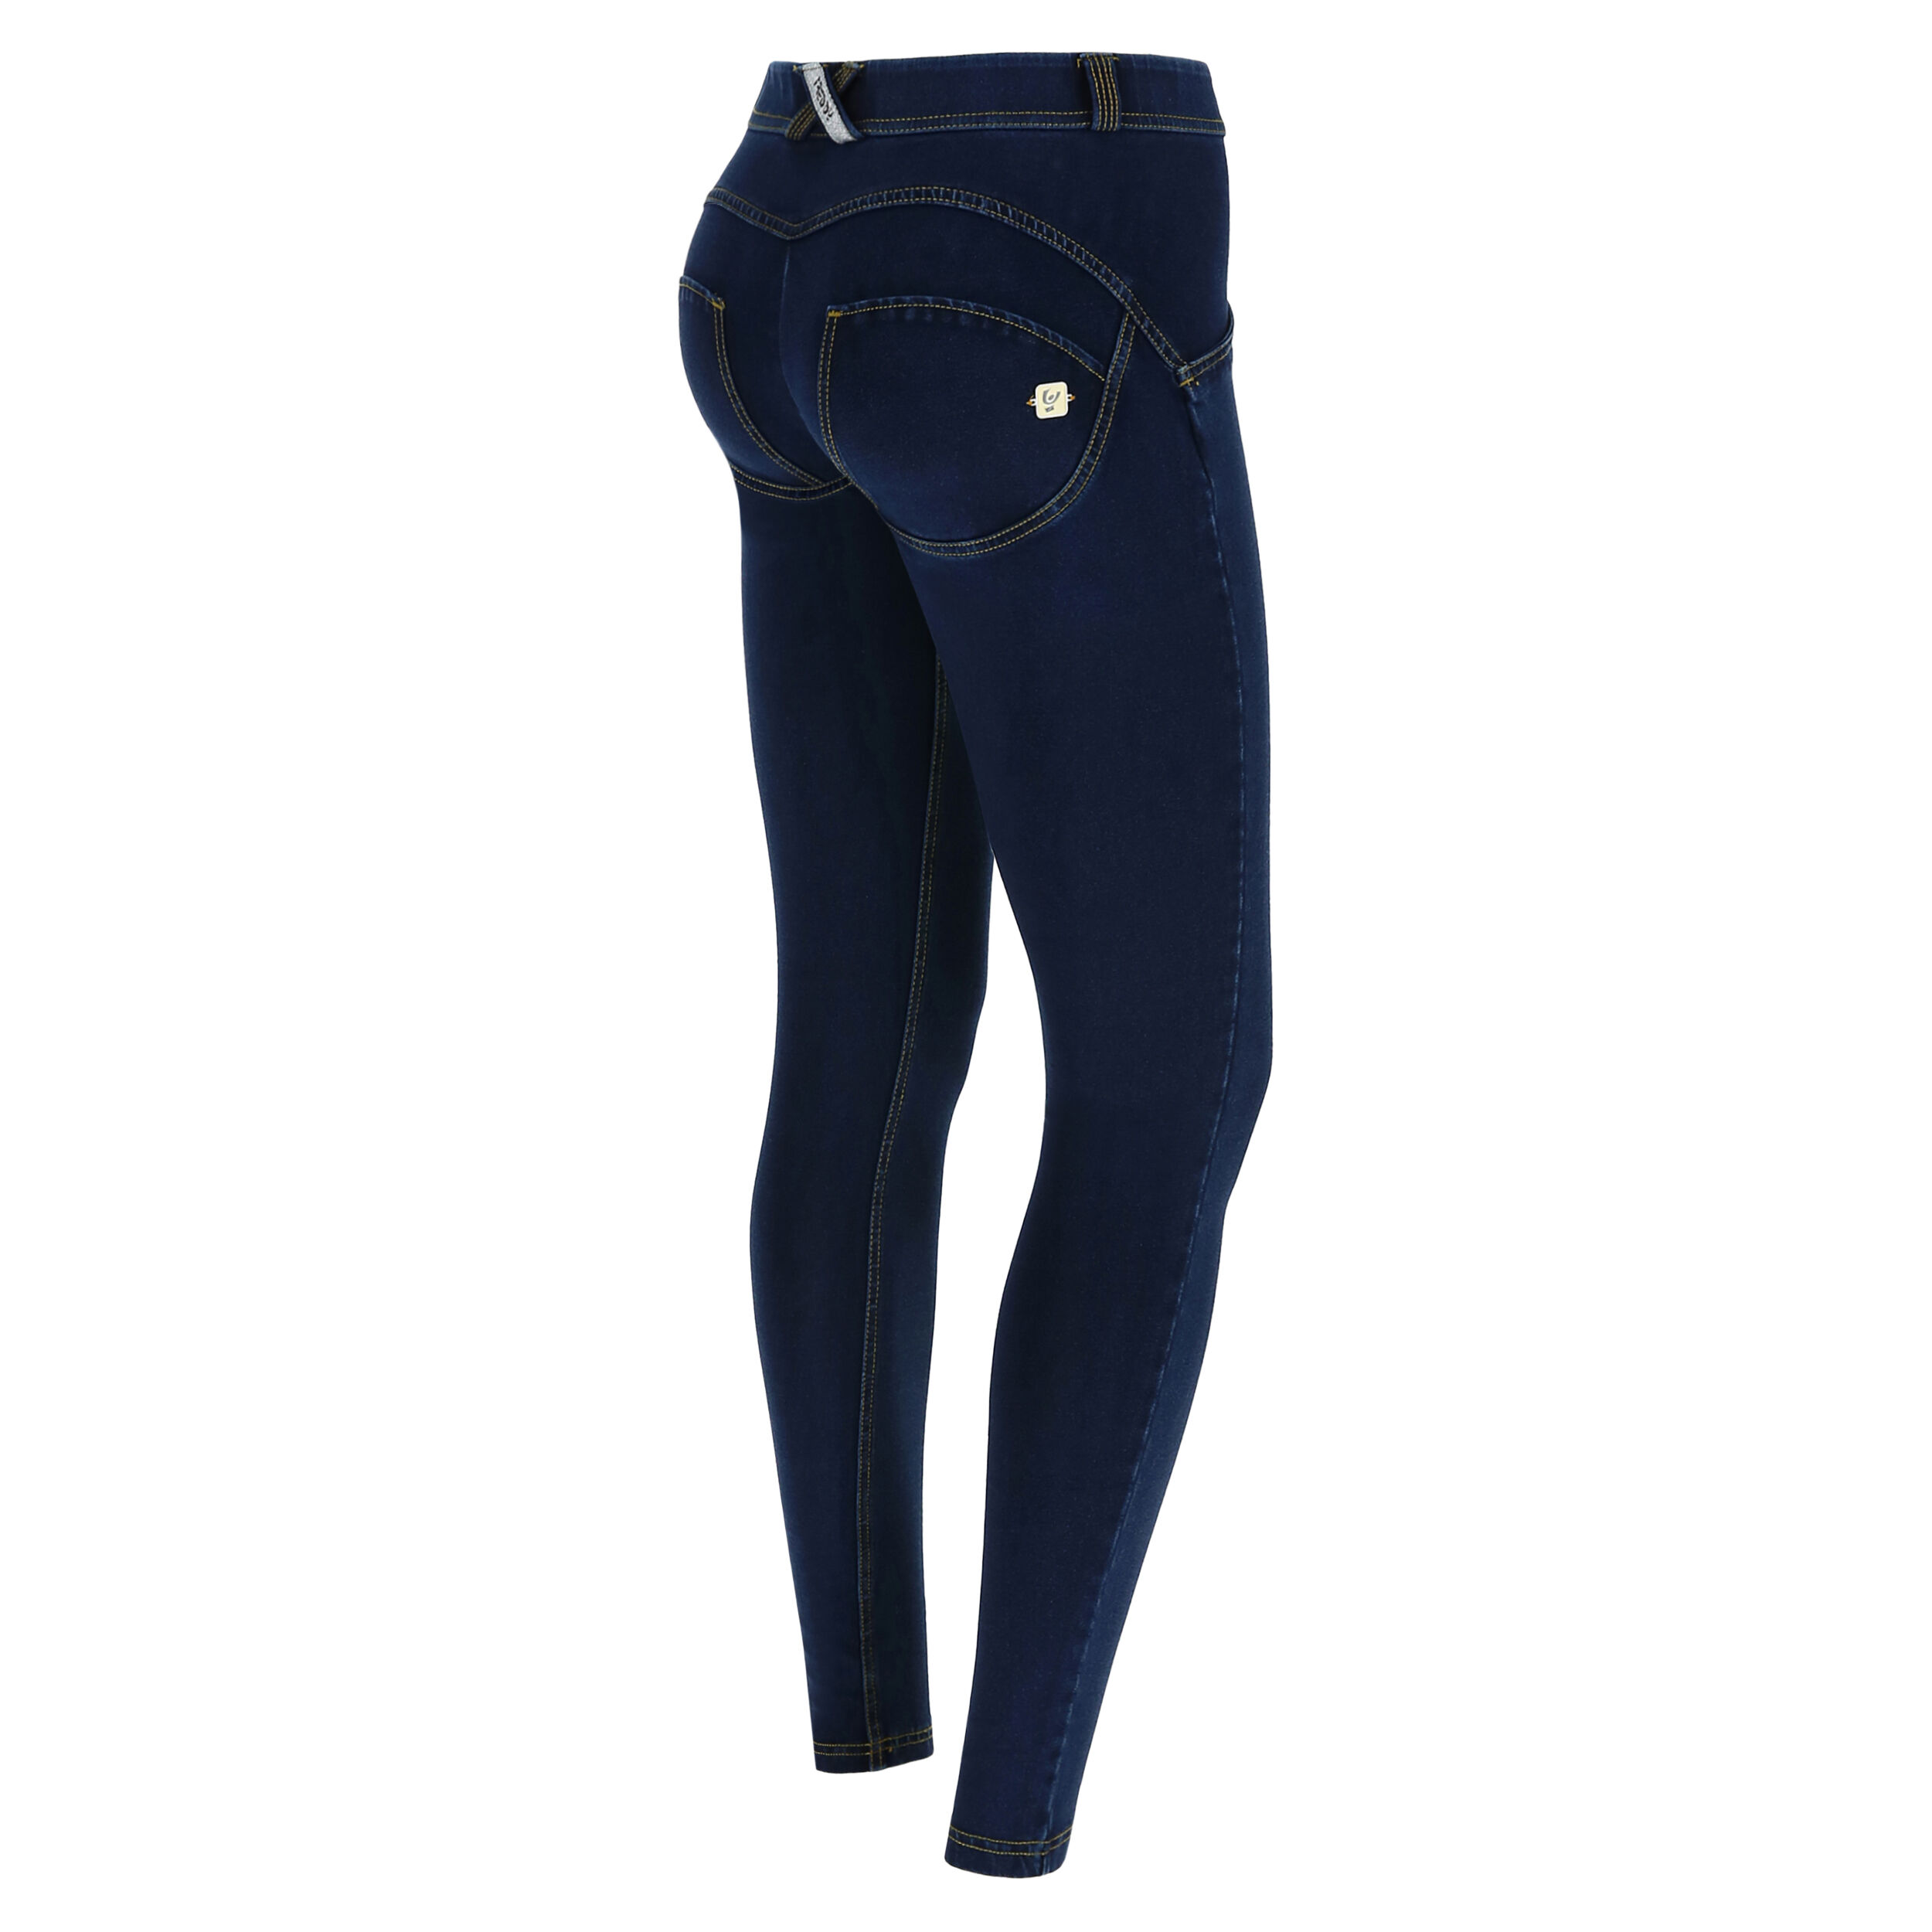 Freddy Pantalone WR.UP® superskinny vita e lunghezza regular in jersey denim scuro Jeans Scuro-Cuciture Gialle Donna Extra Small